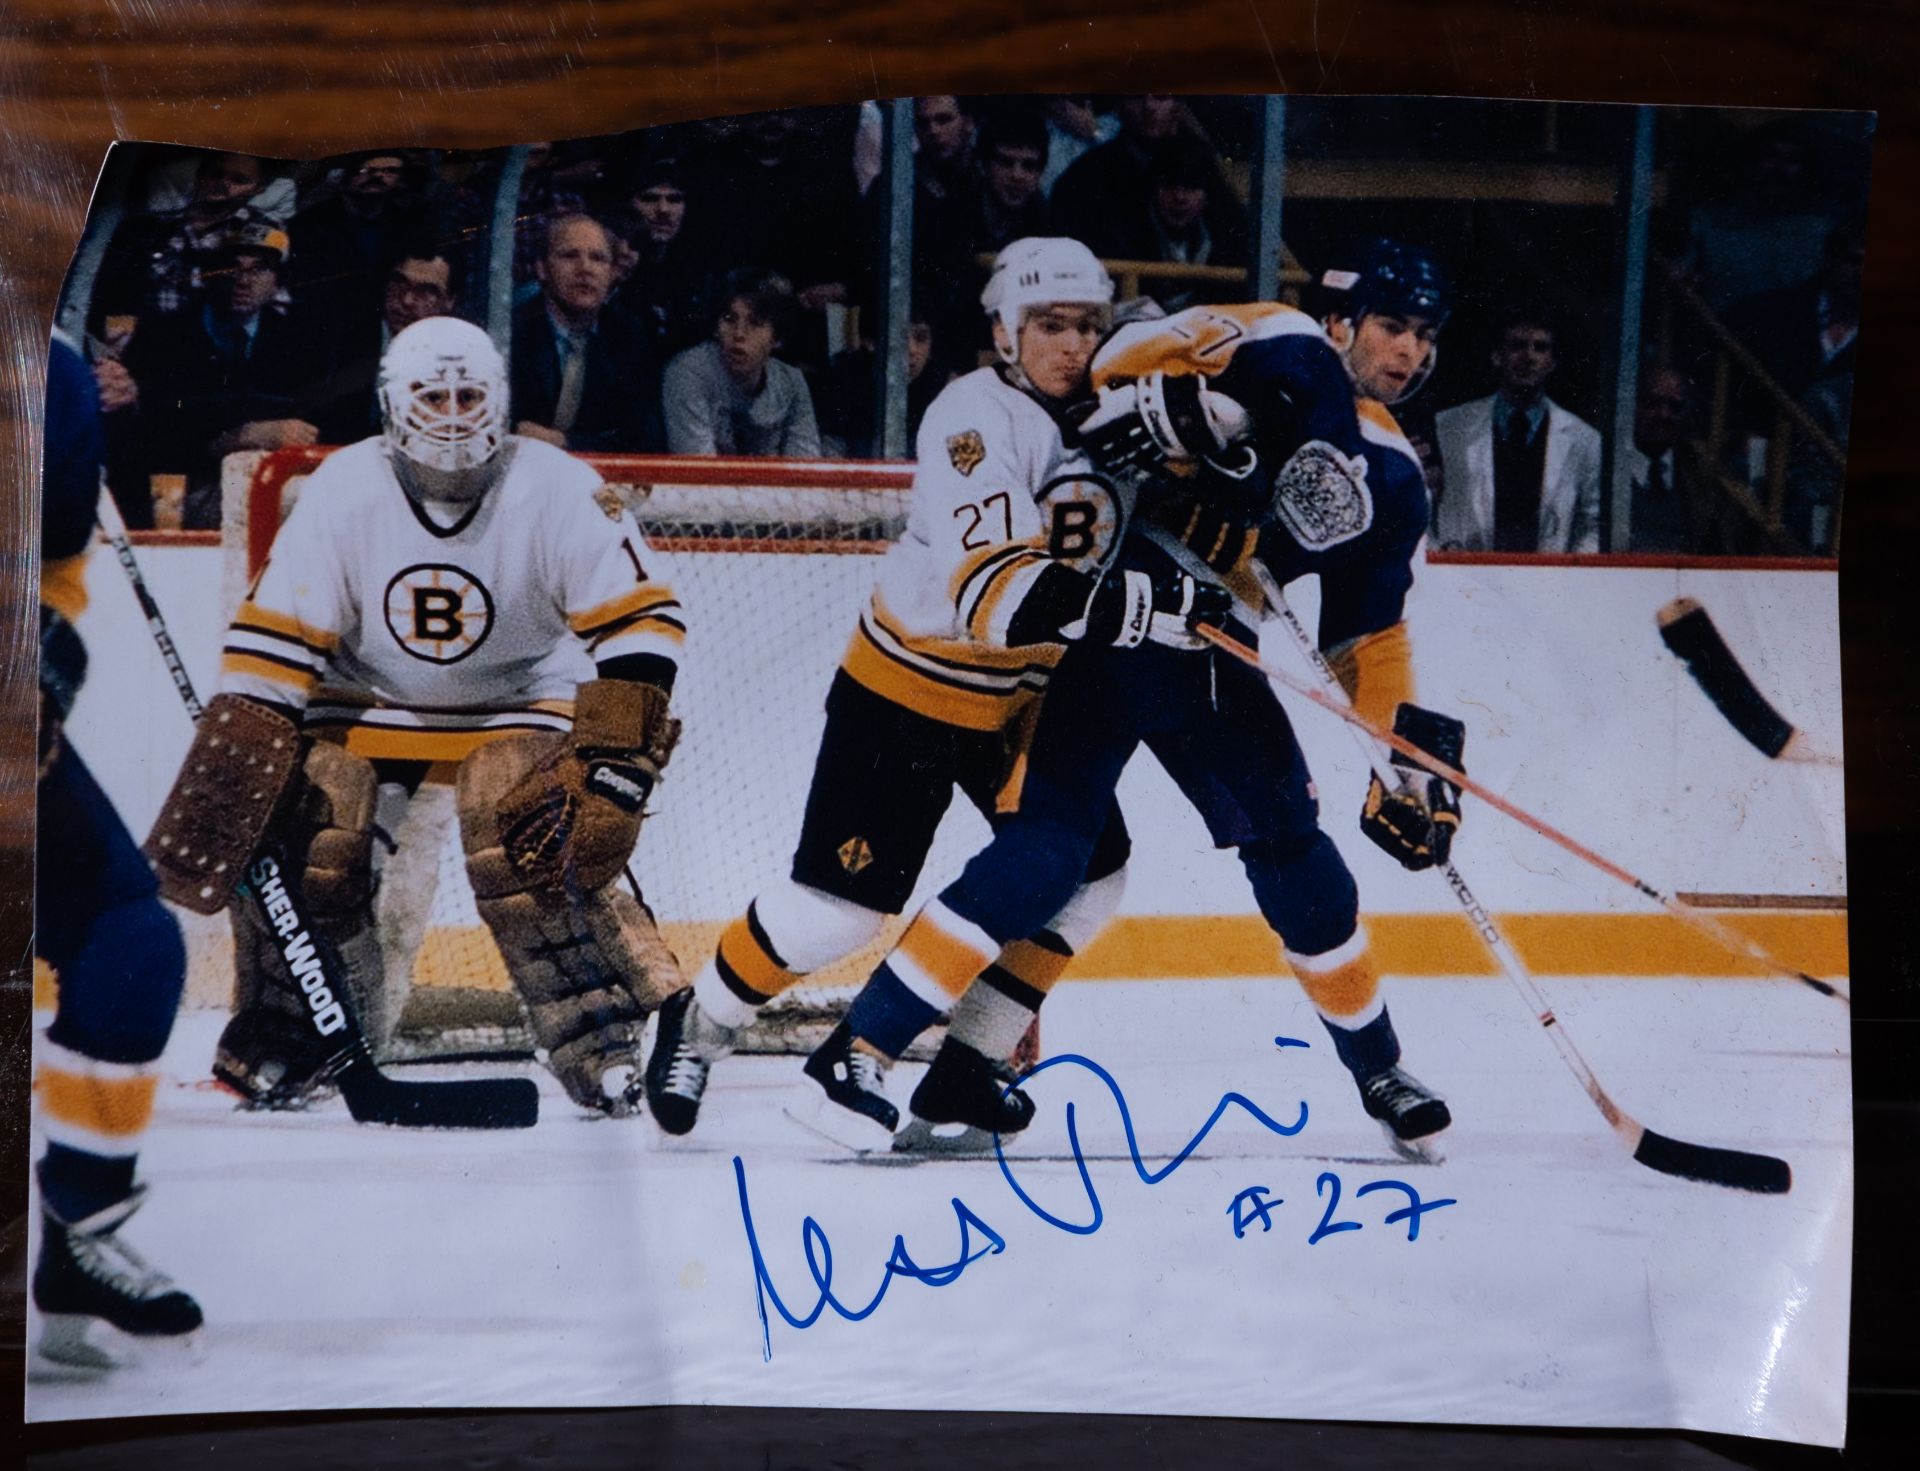 Bruins Photo 6"x4" Signed "#27"